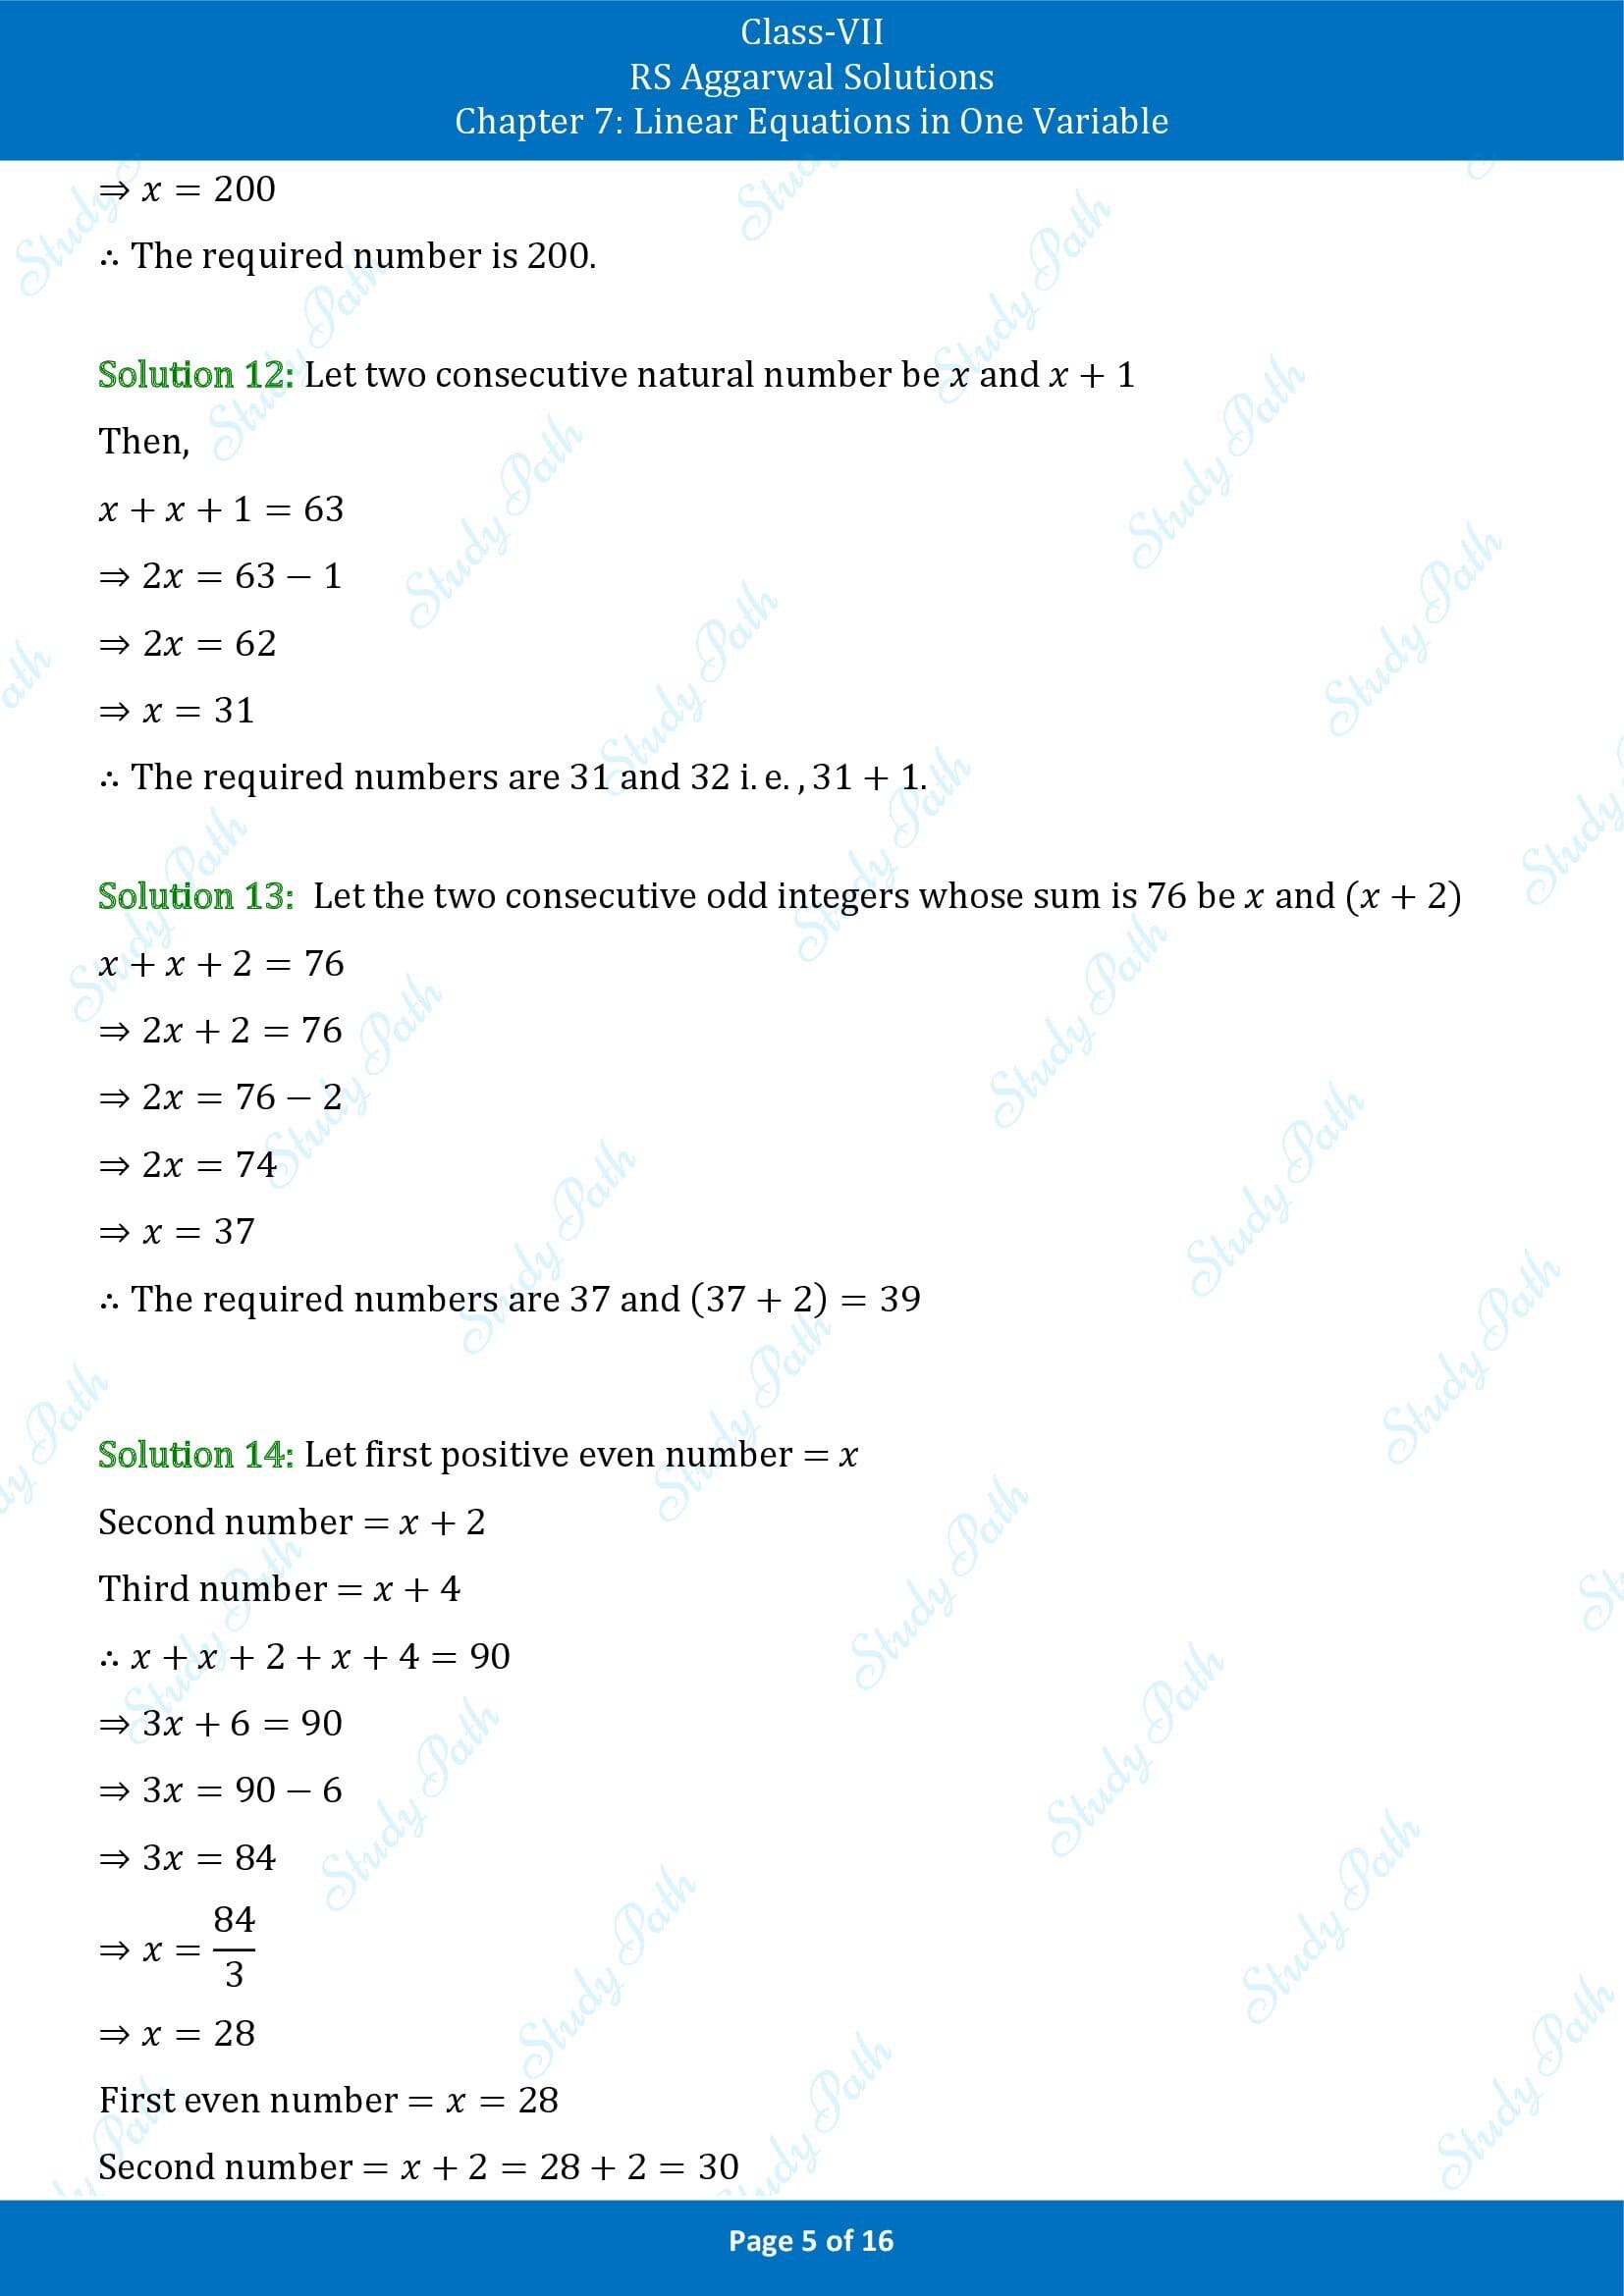 RS Aggarwal Solutions Class 7 Chapter 7 Linear Equations in One Variable Exercise 7B 00005